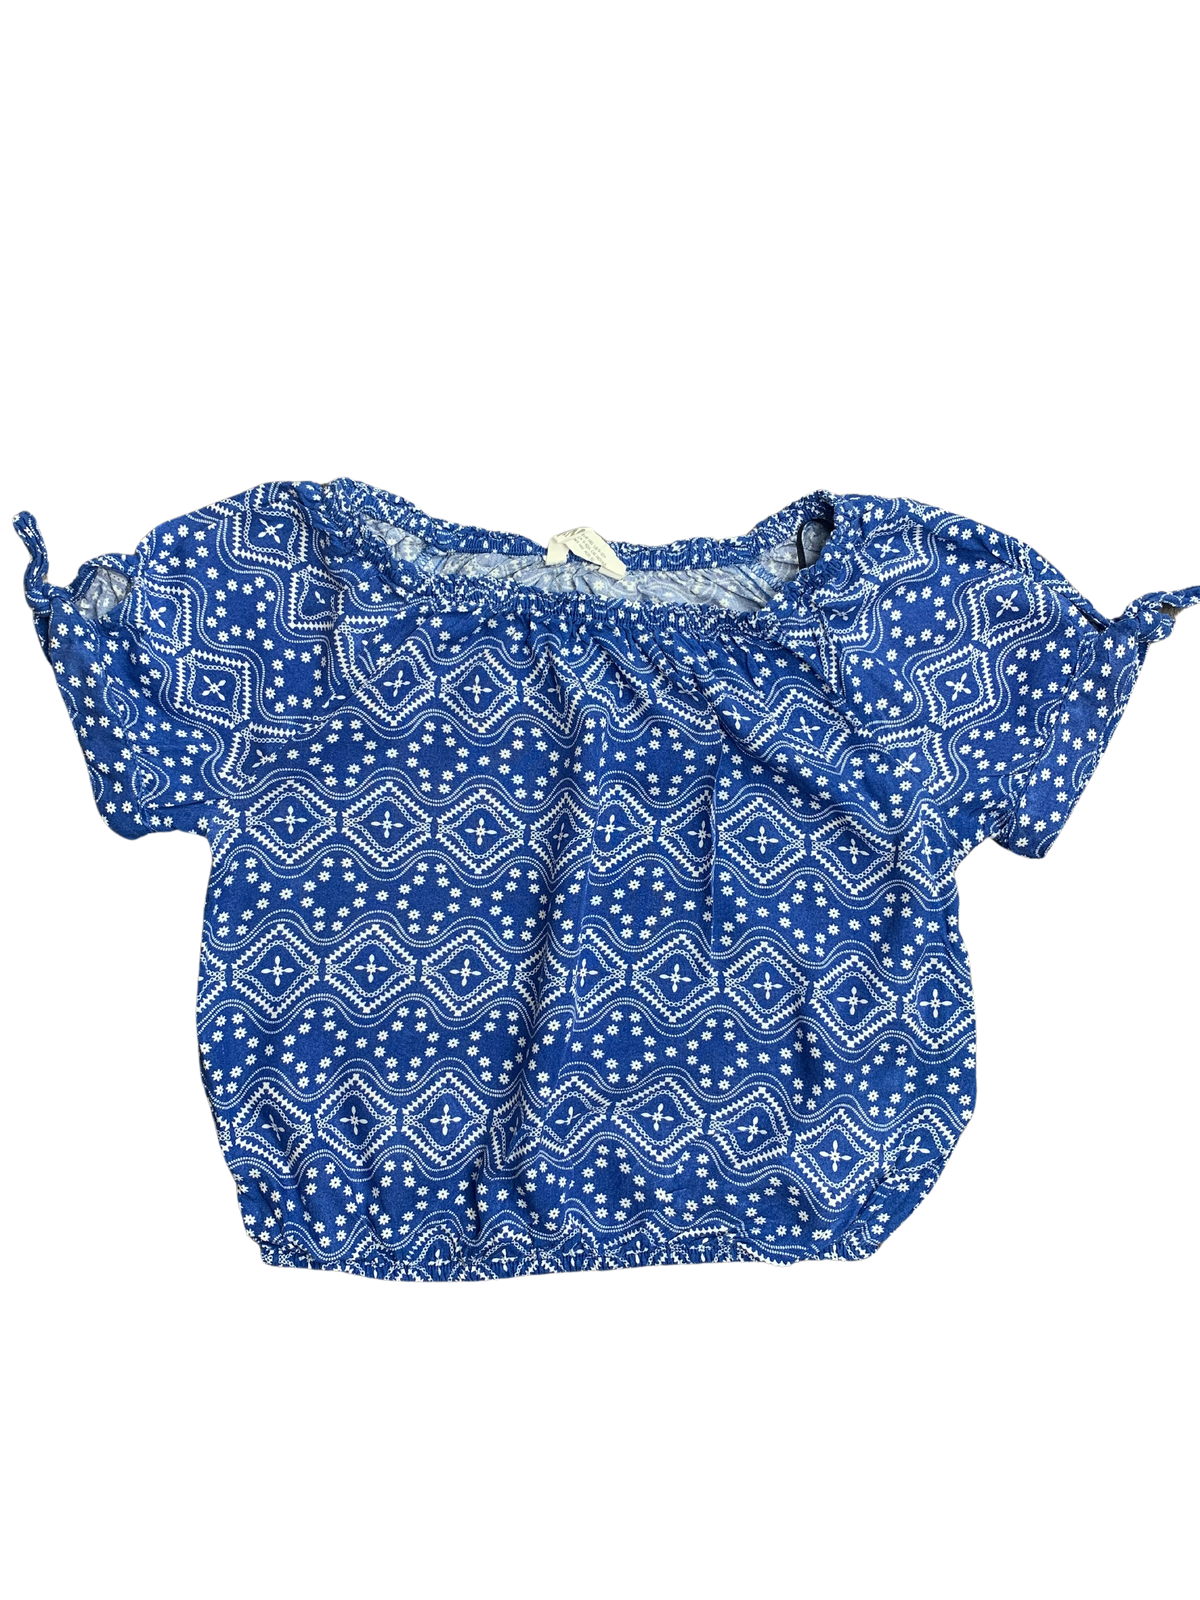 H&M Patterned Top Girls 9-10 Years